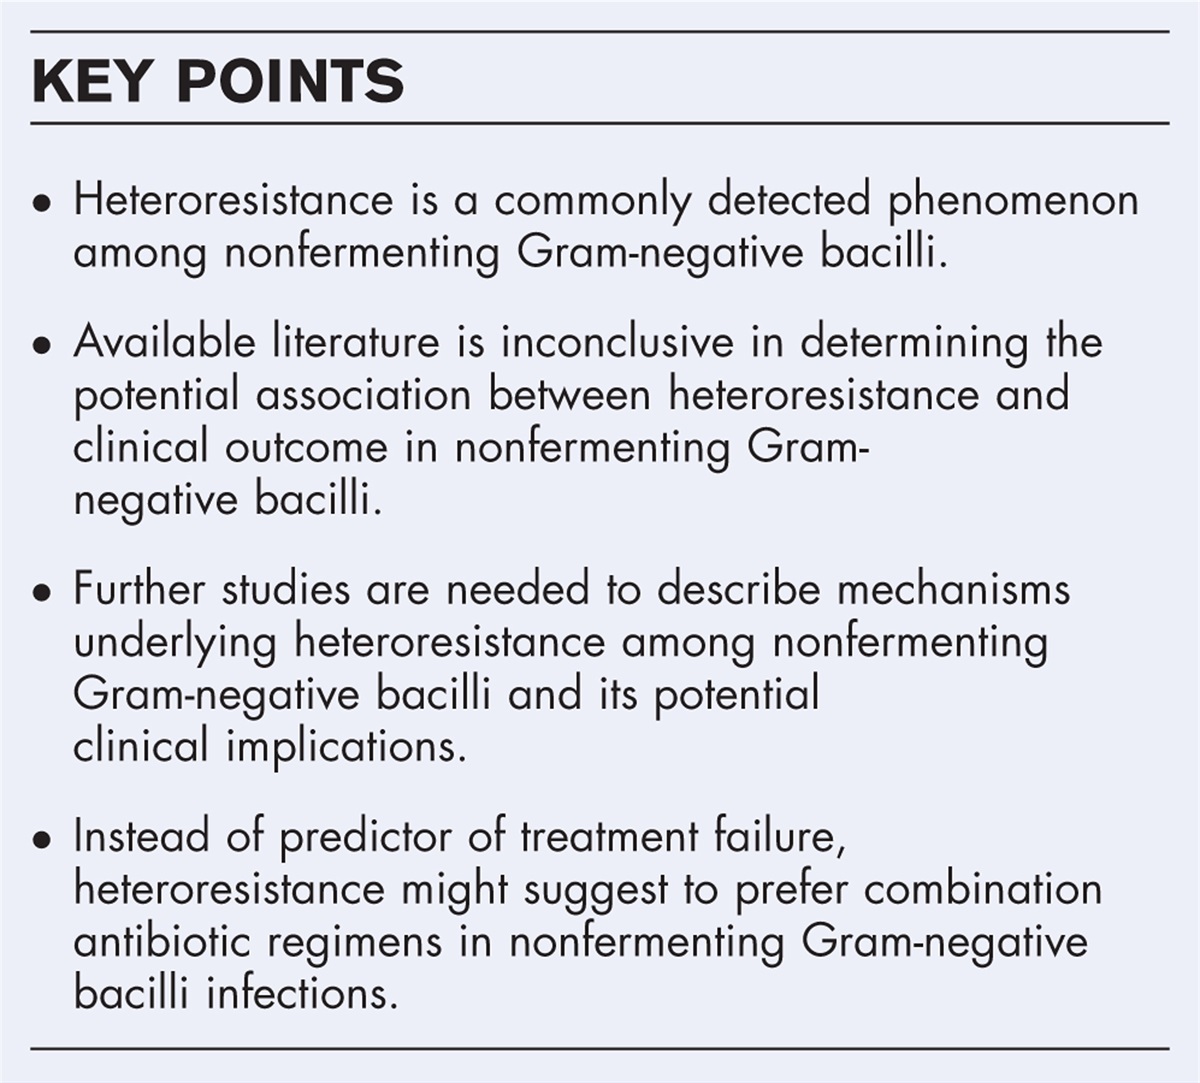 What is the clinical significance of ‘heteroresistance’ in nonfermenting Gram-negative strains?